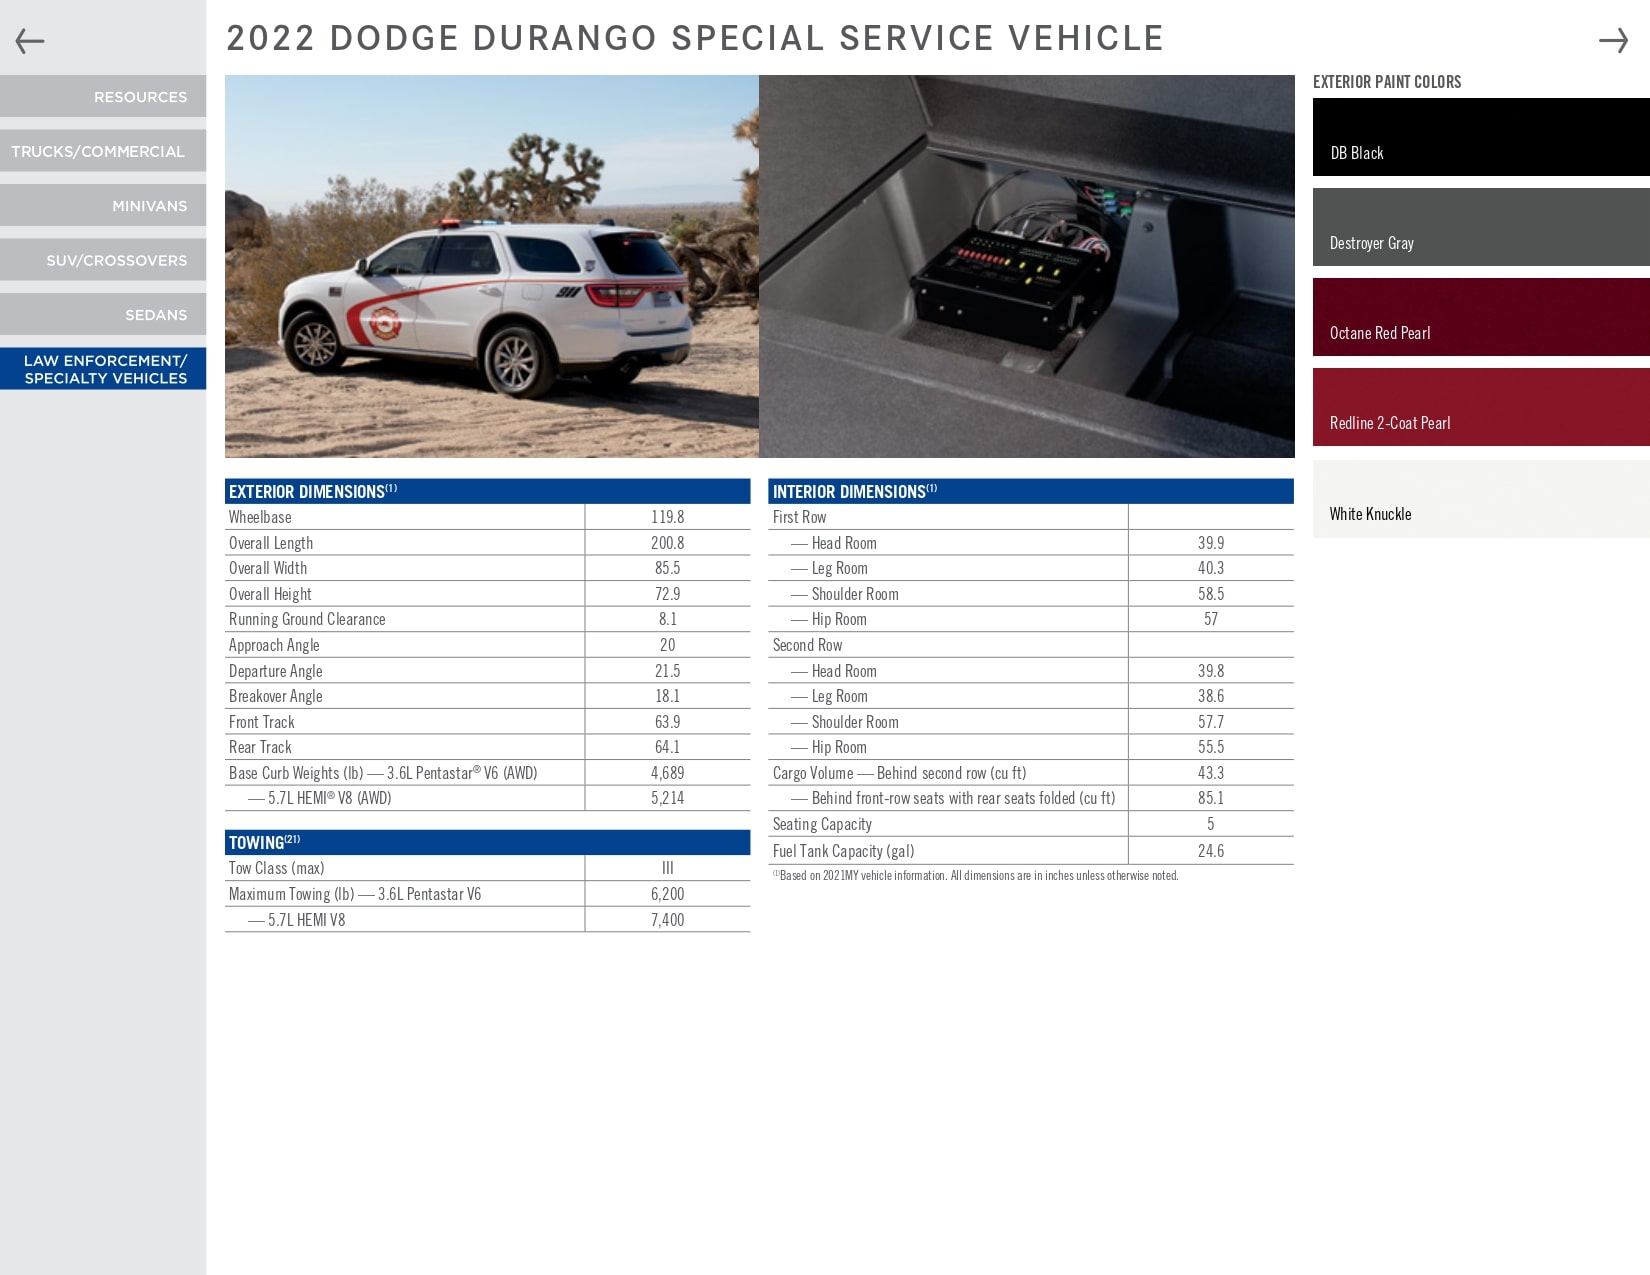 For the 2022 year color shades and examples of the exterior color of the dodge model.